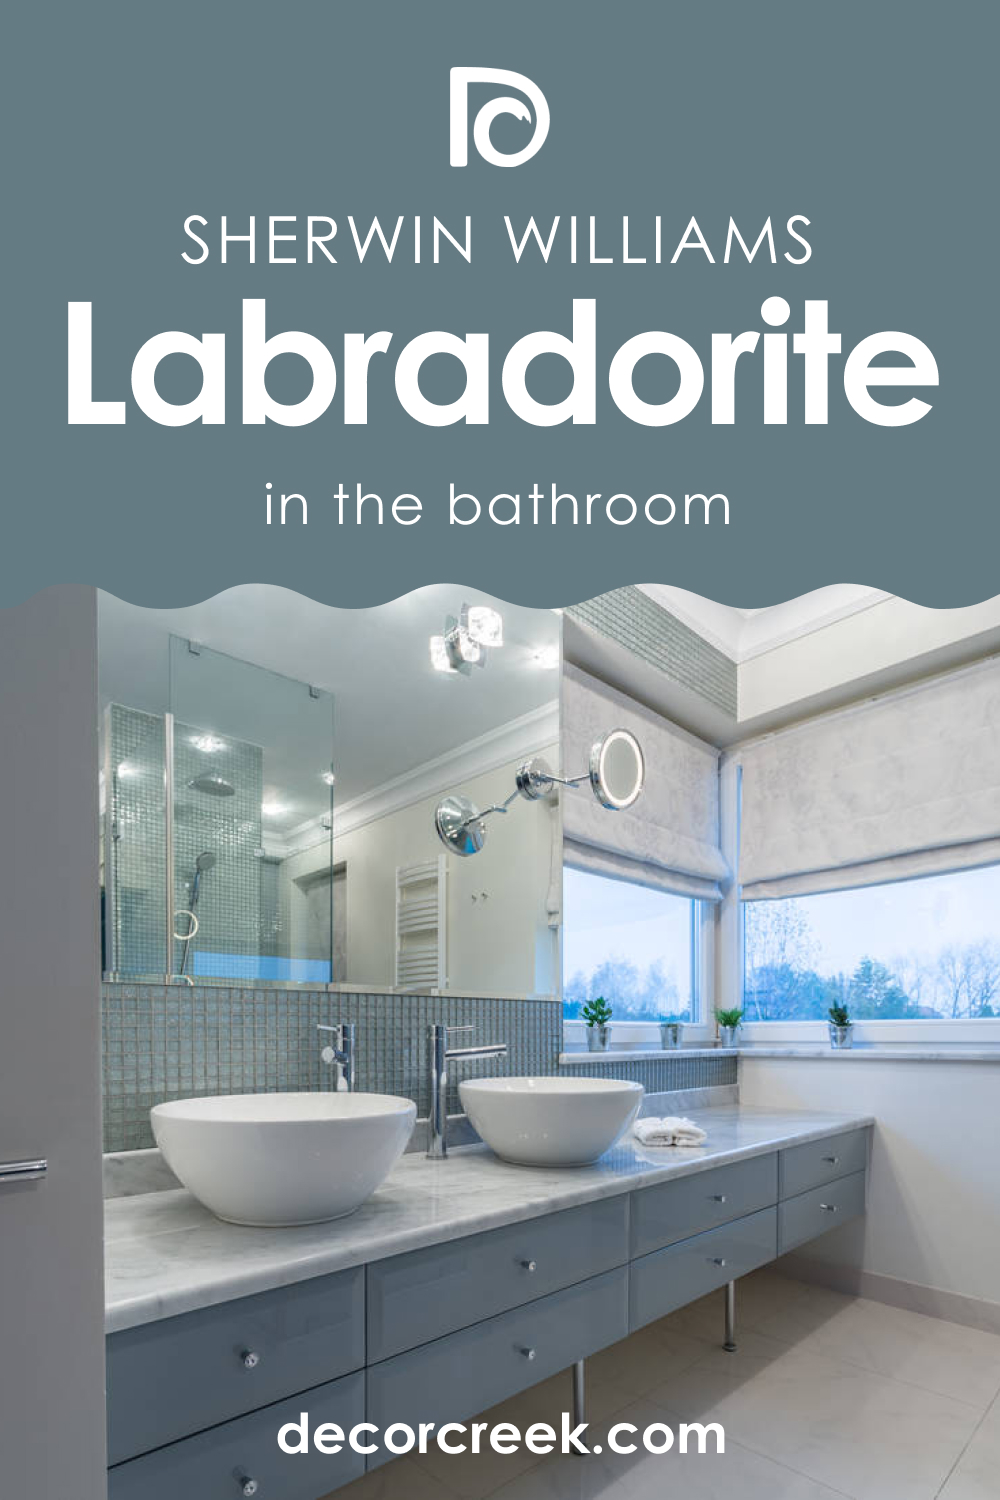 How to Use SW 7619 Labradorite in the Bathroom